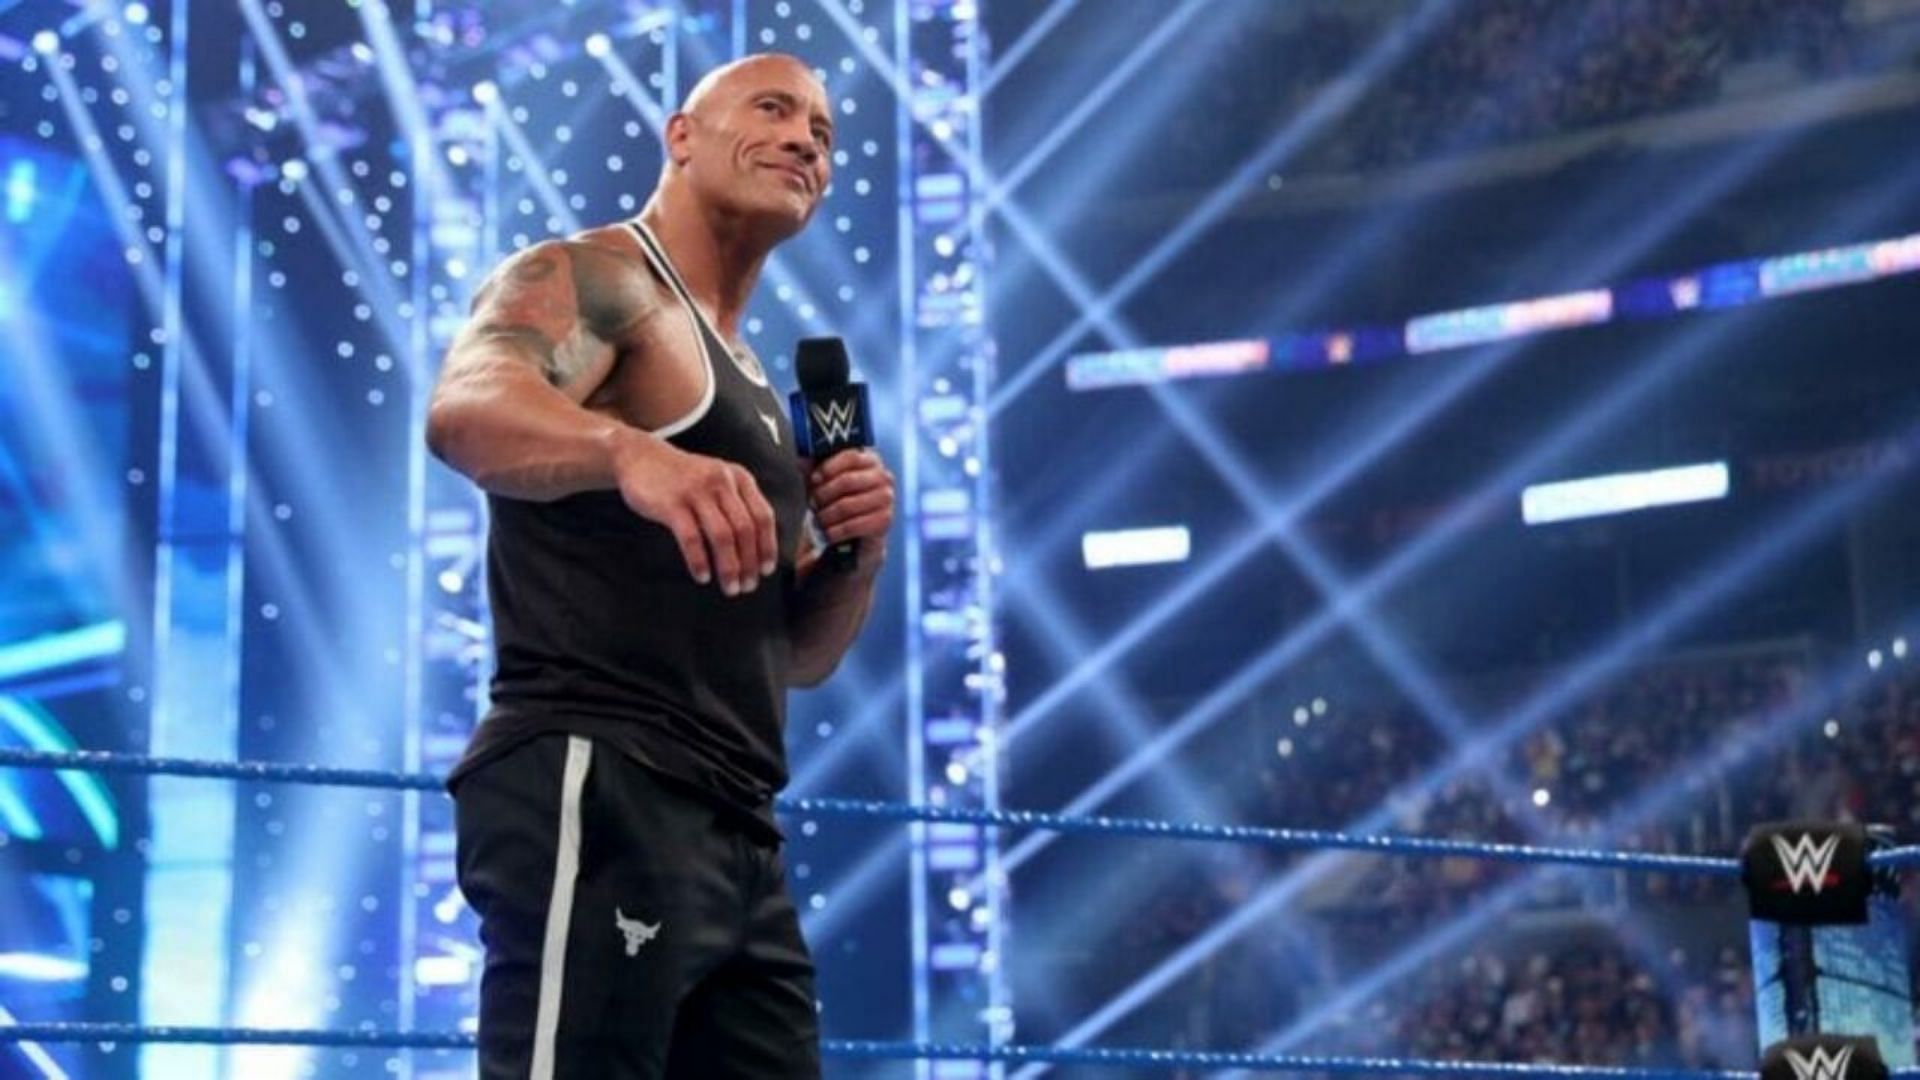 Finally The Rock has come... but not from the indies